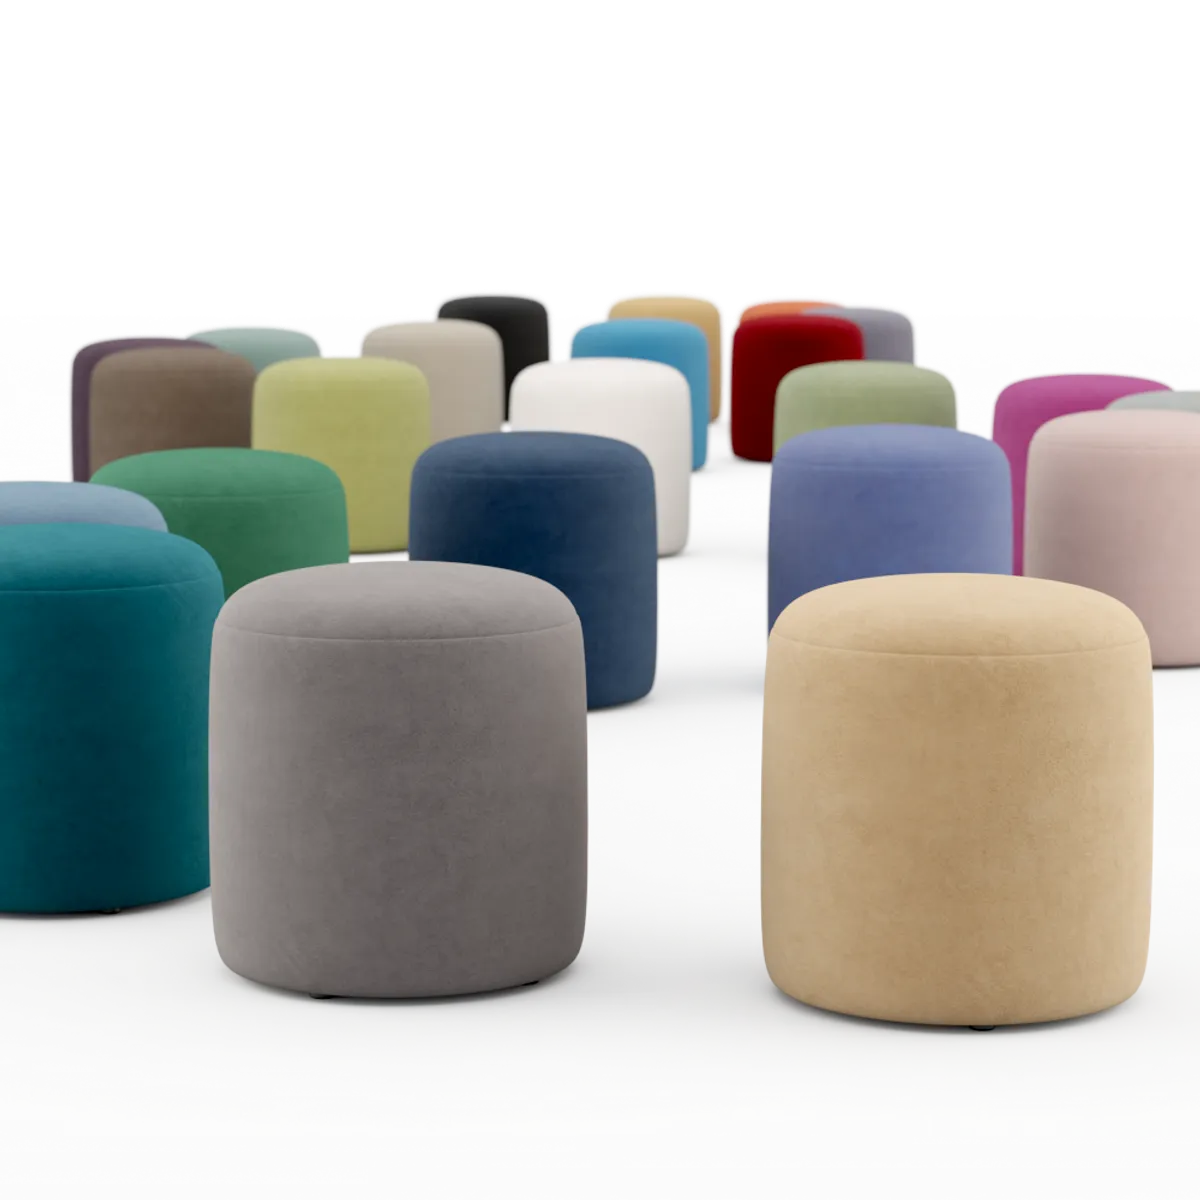 Marshmallow Stool Collection Original Size Inside Out Contracts